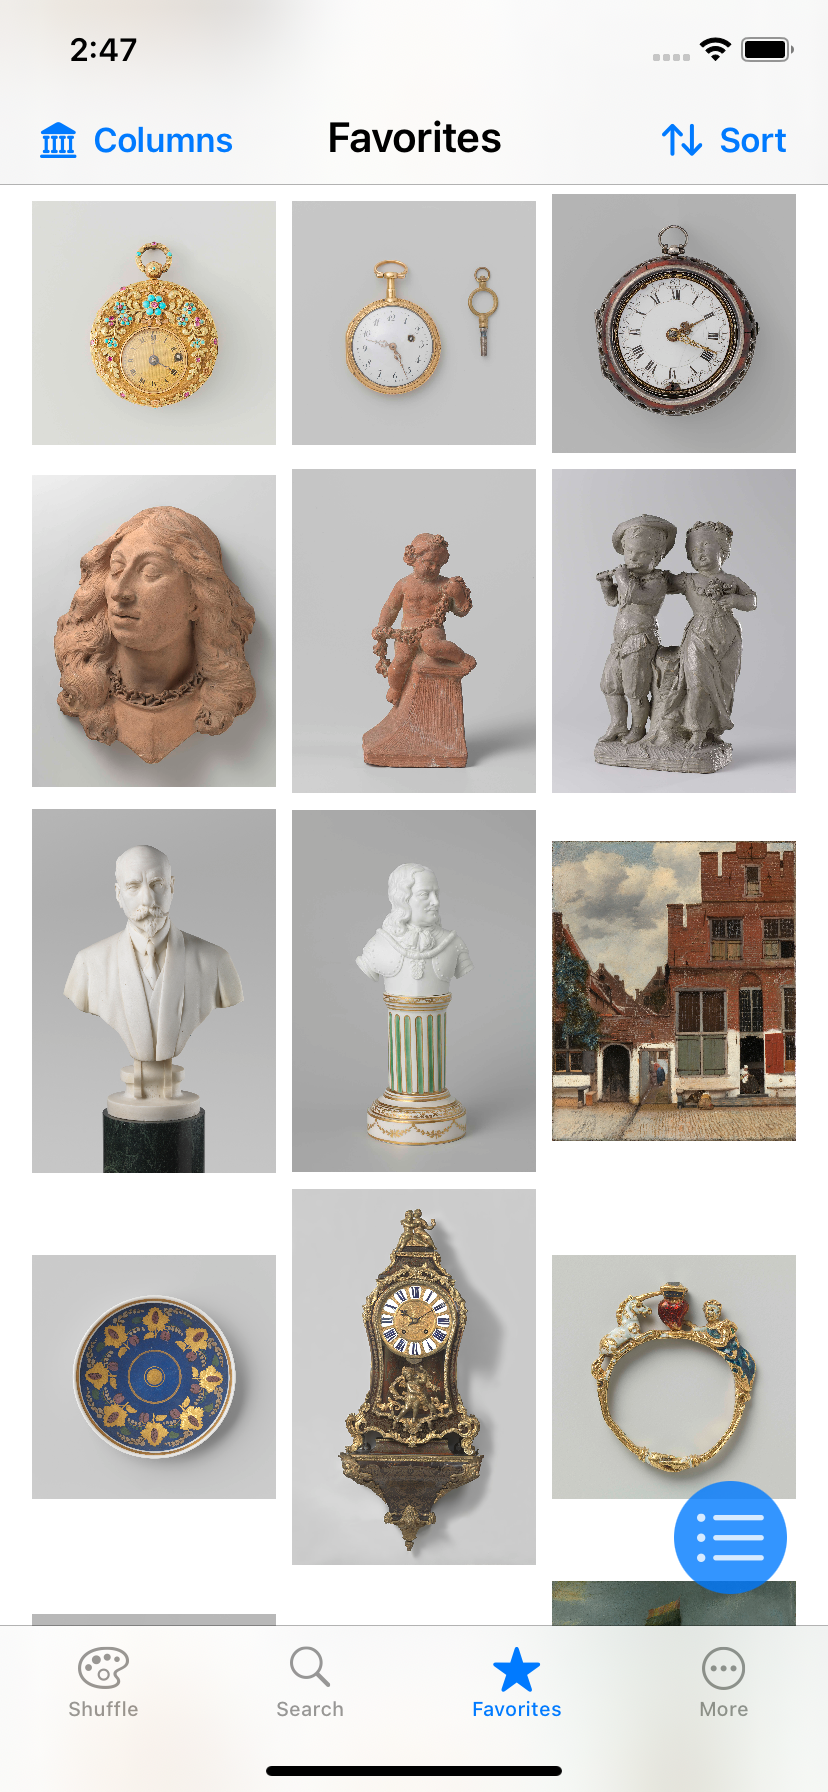 Museum Shuffle lets you find random artwork from the Rijksmuseum.